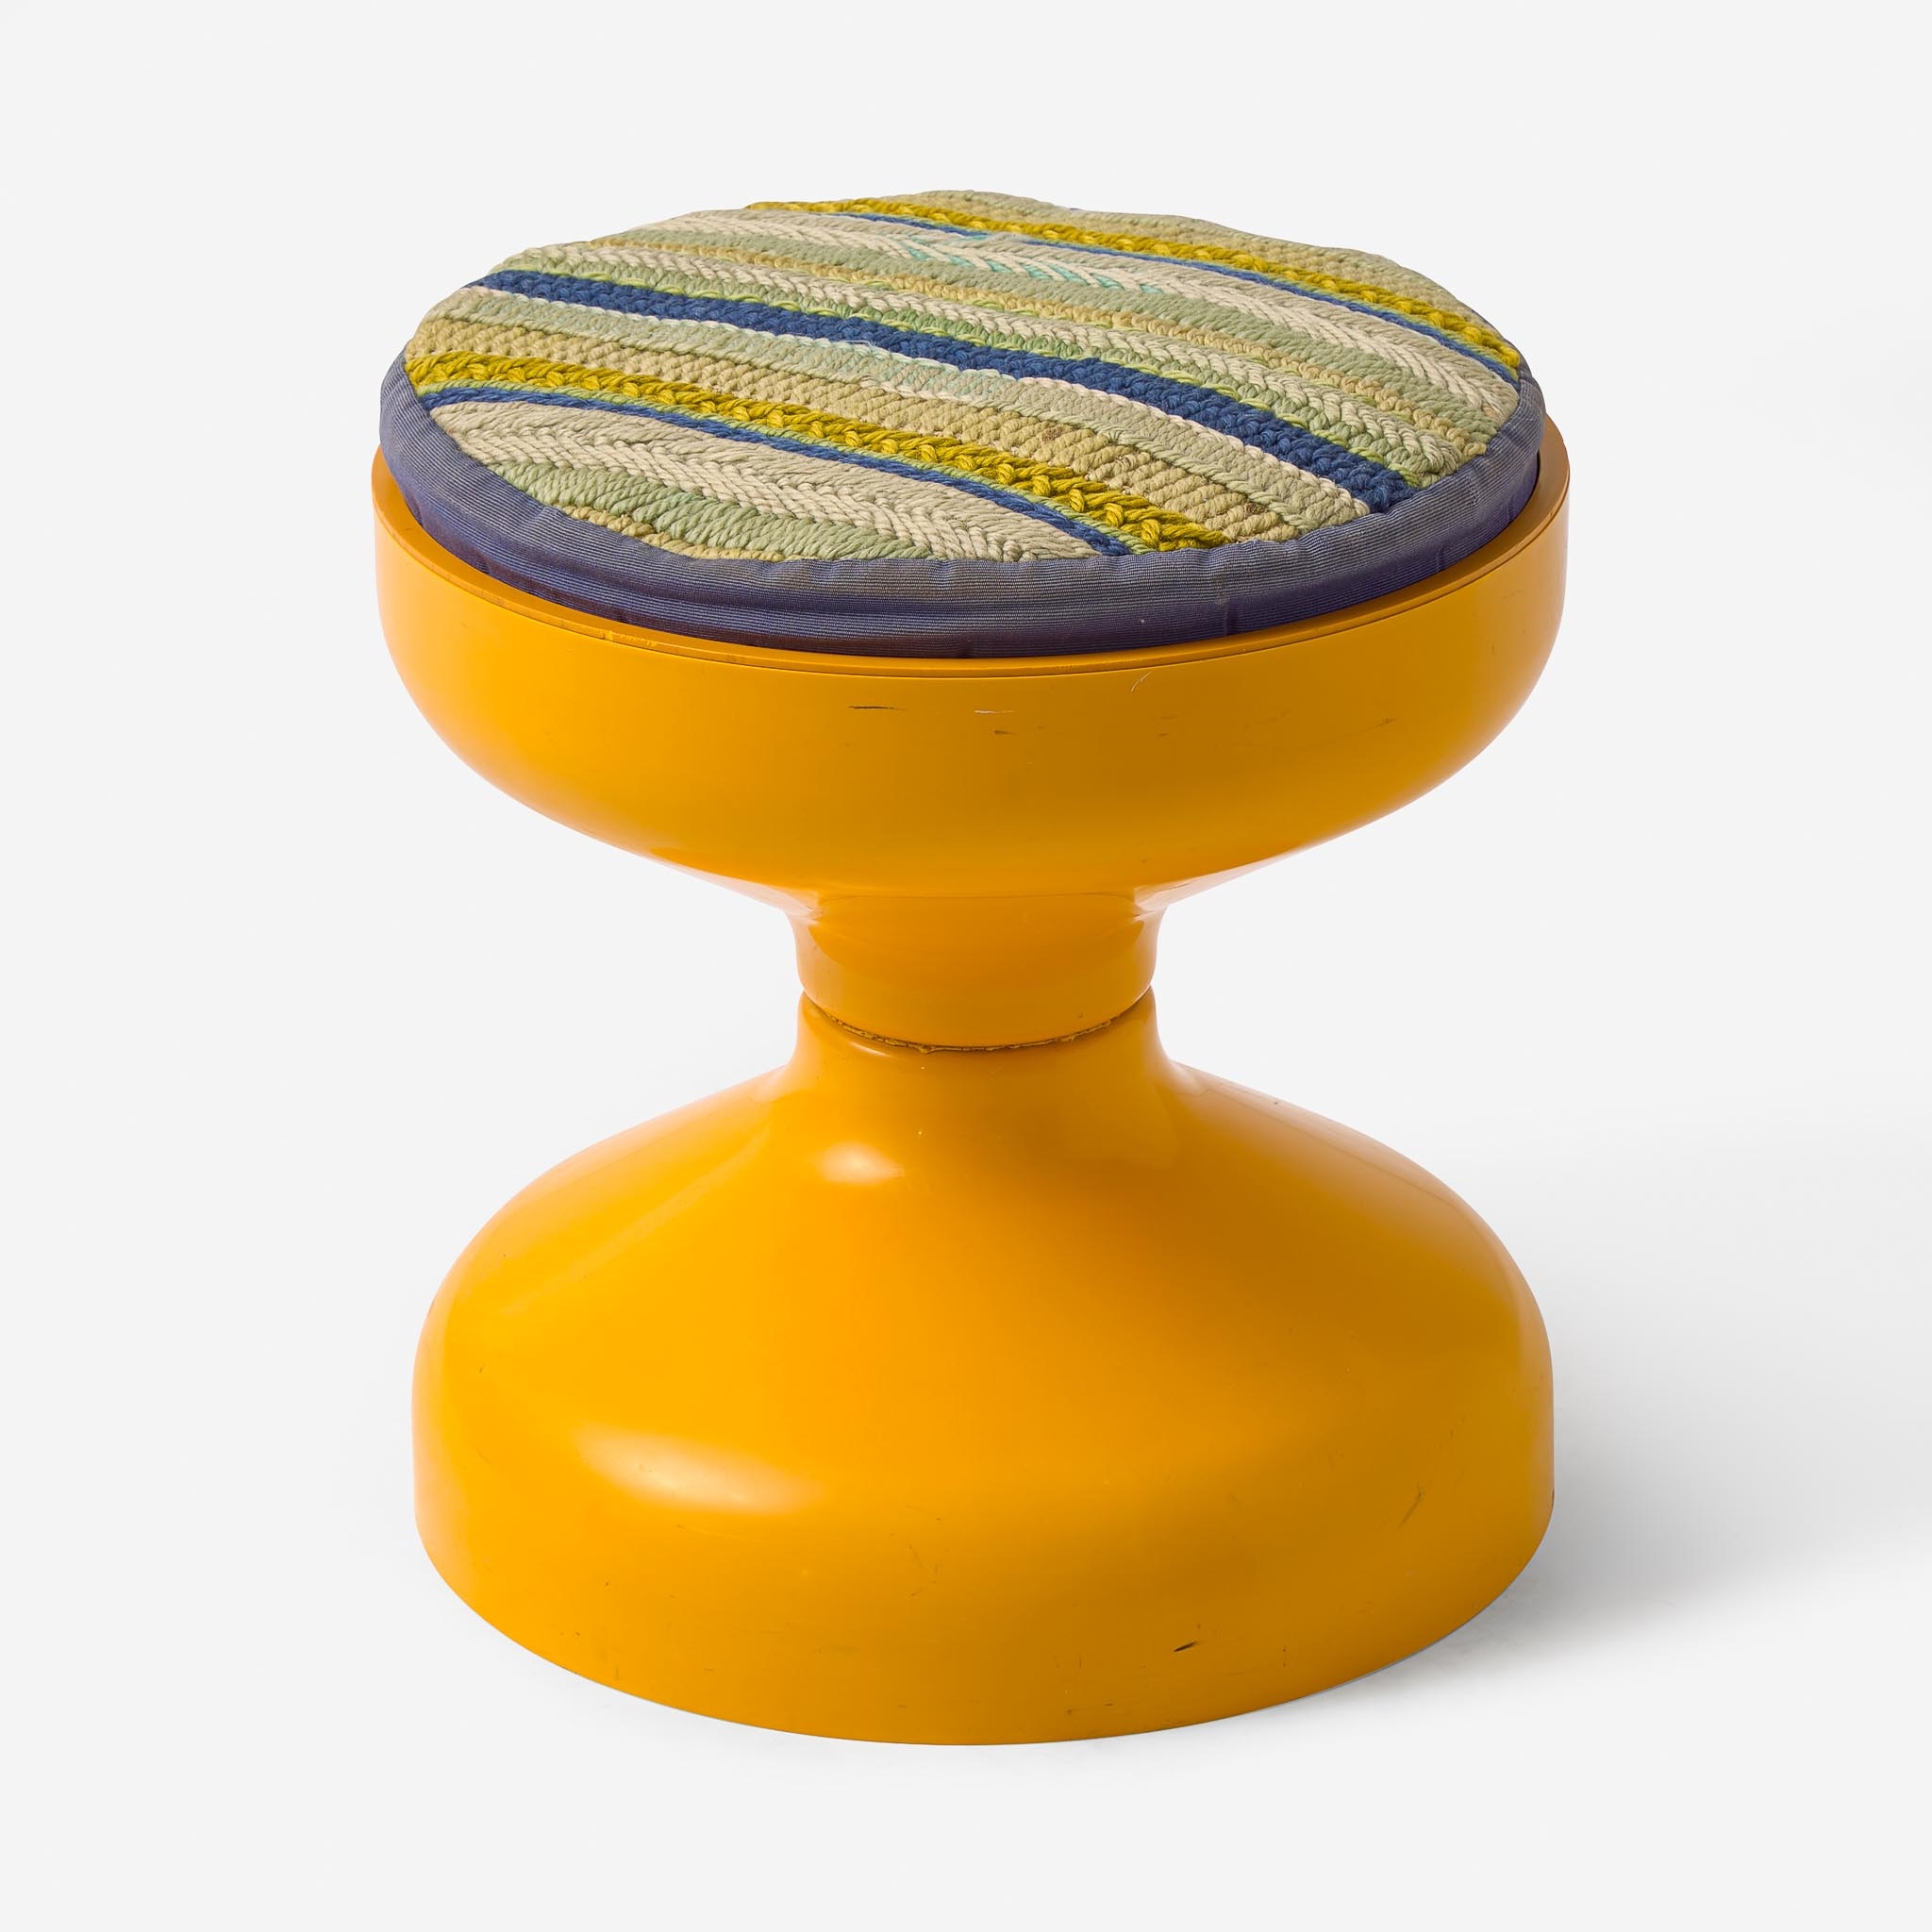 "Rocchetto" Kartell Stool with Erica Wilson Embroidered Cushion, Italy and USA, circa 1970 by Pier Giacomo Castiglioni, Achille Castiglioni, Erica Wilson